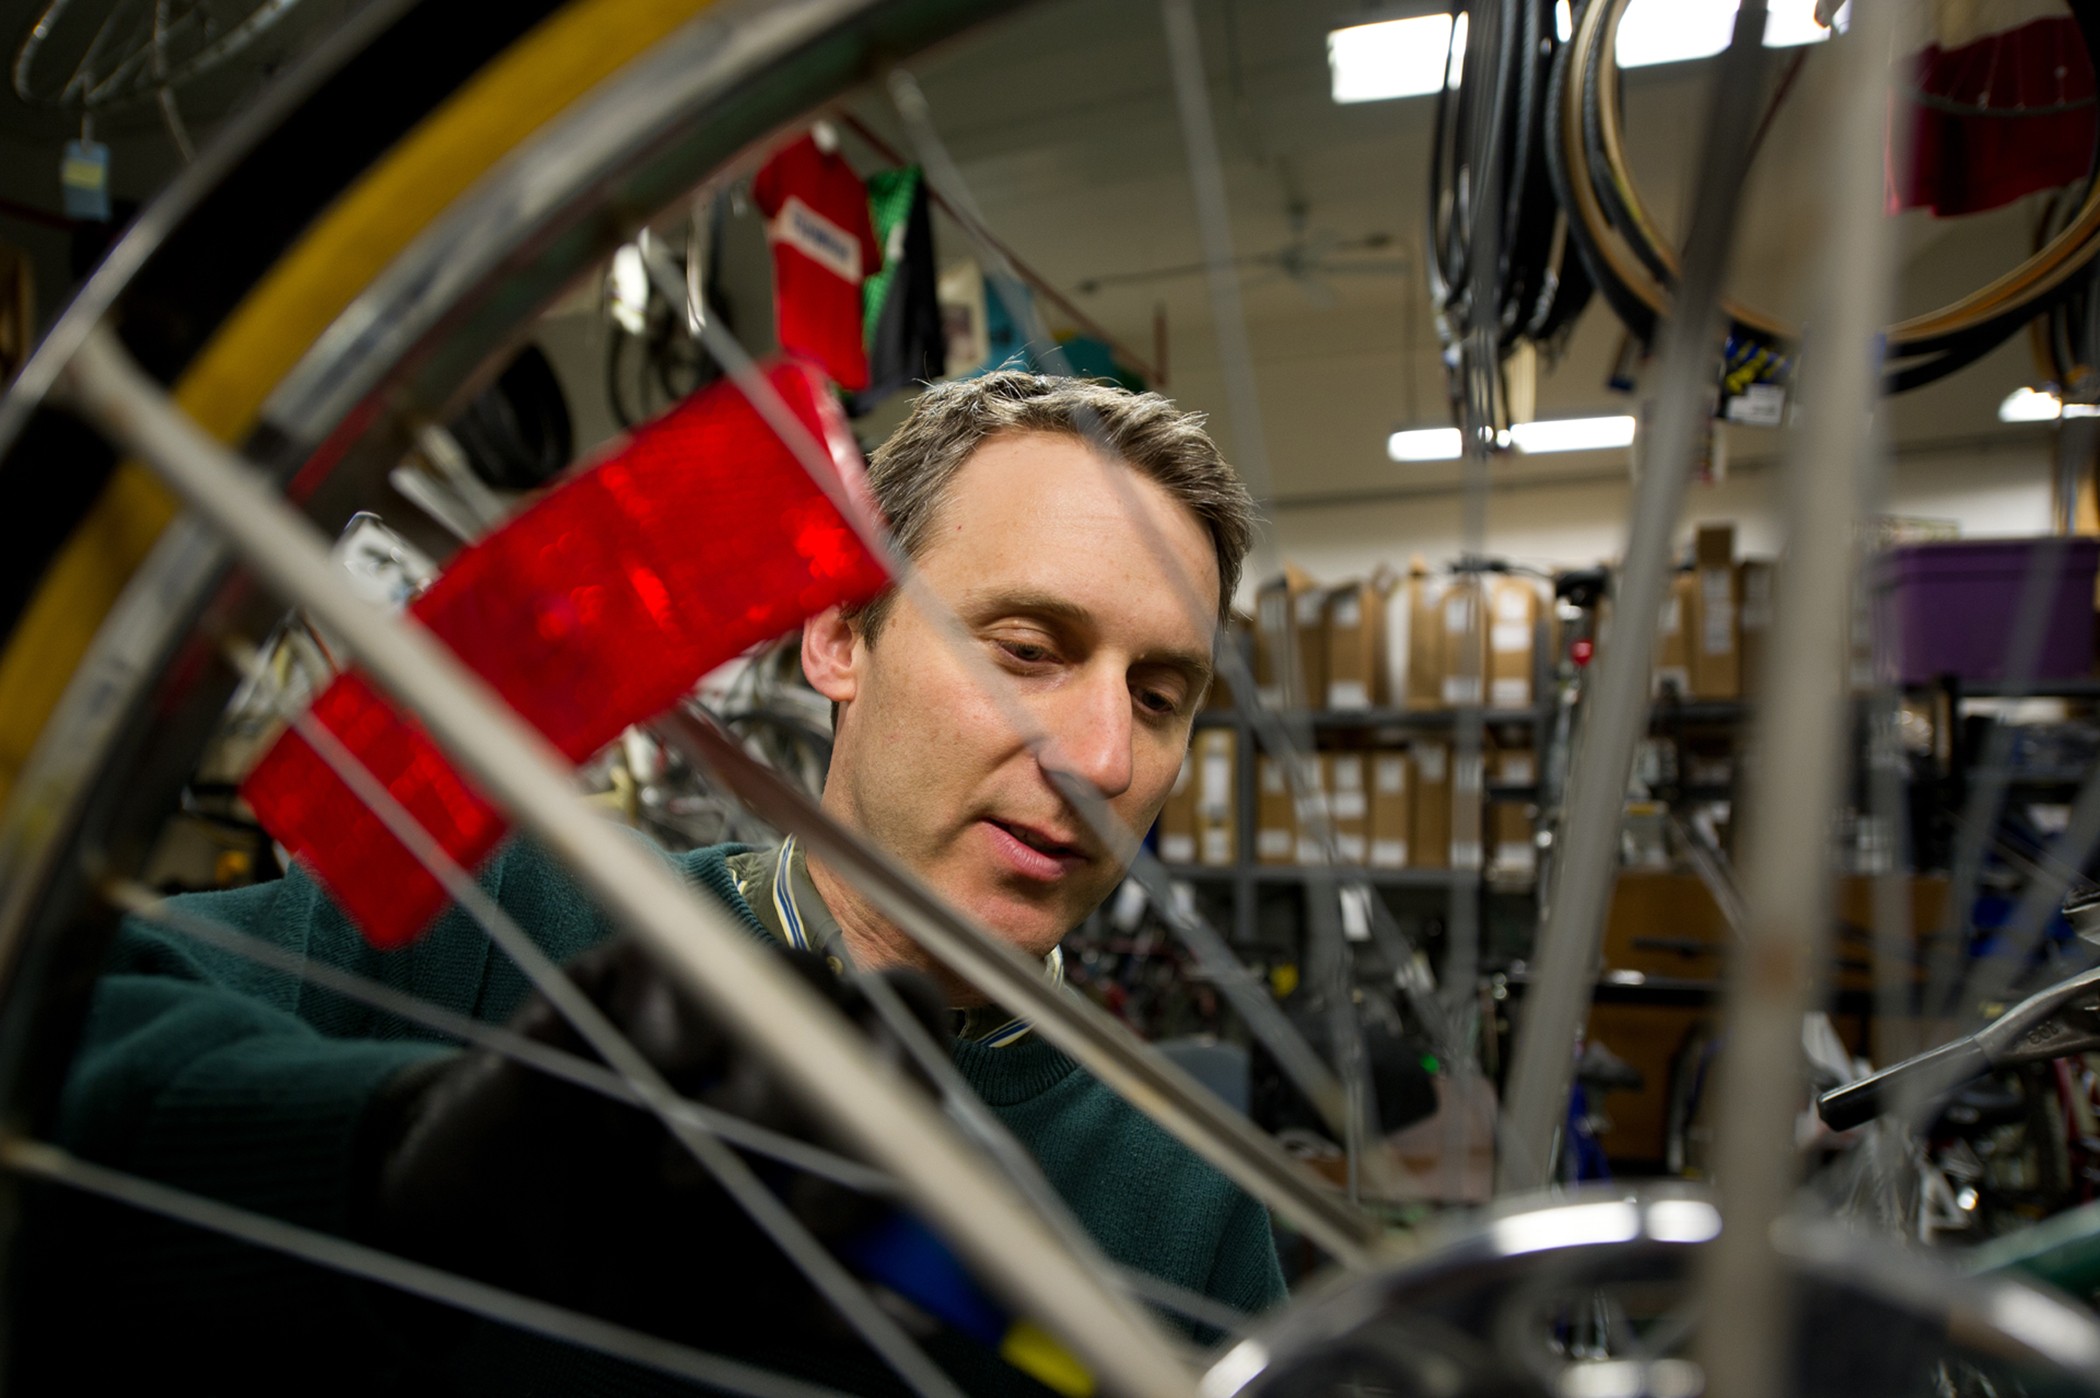 Tim Potter being photographed through the spokes of a bicycle wheel